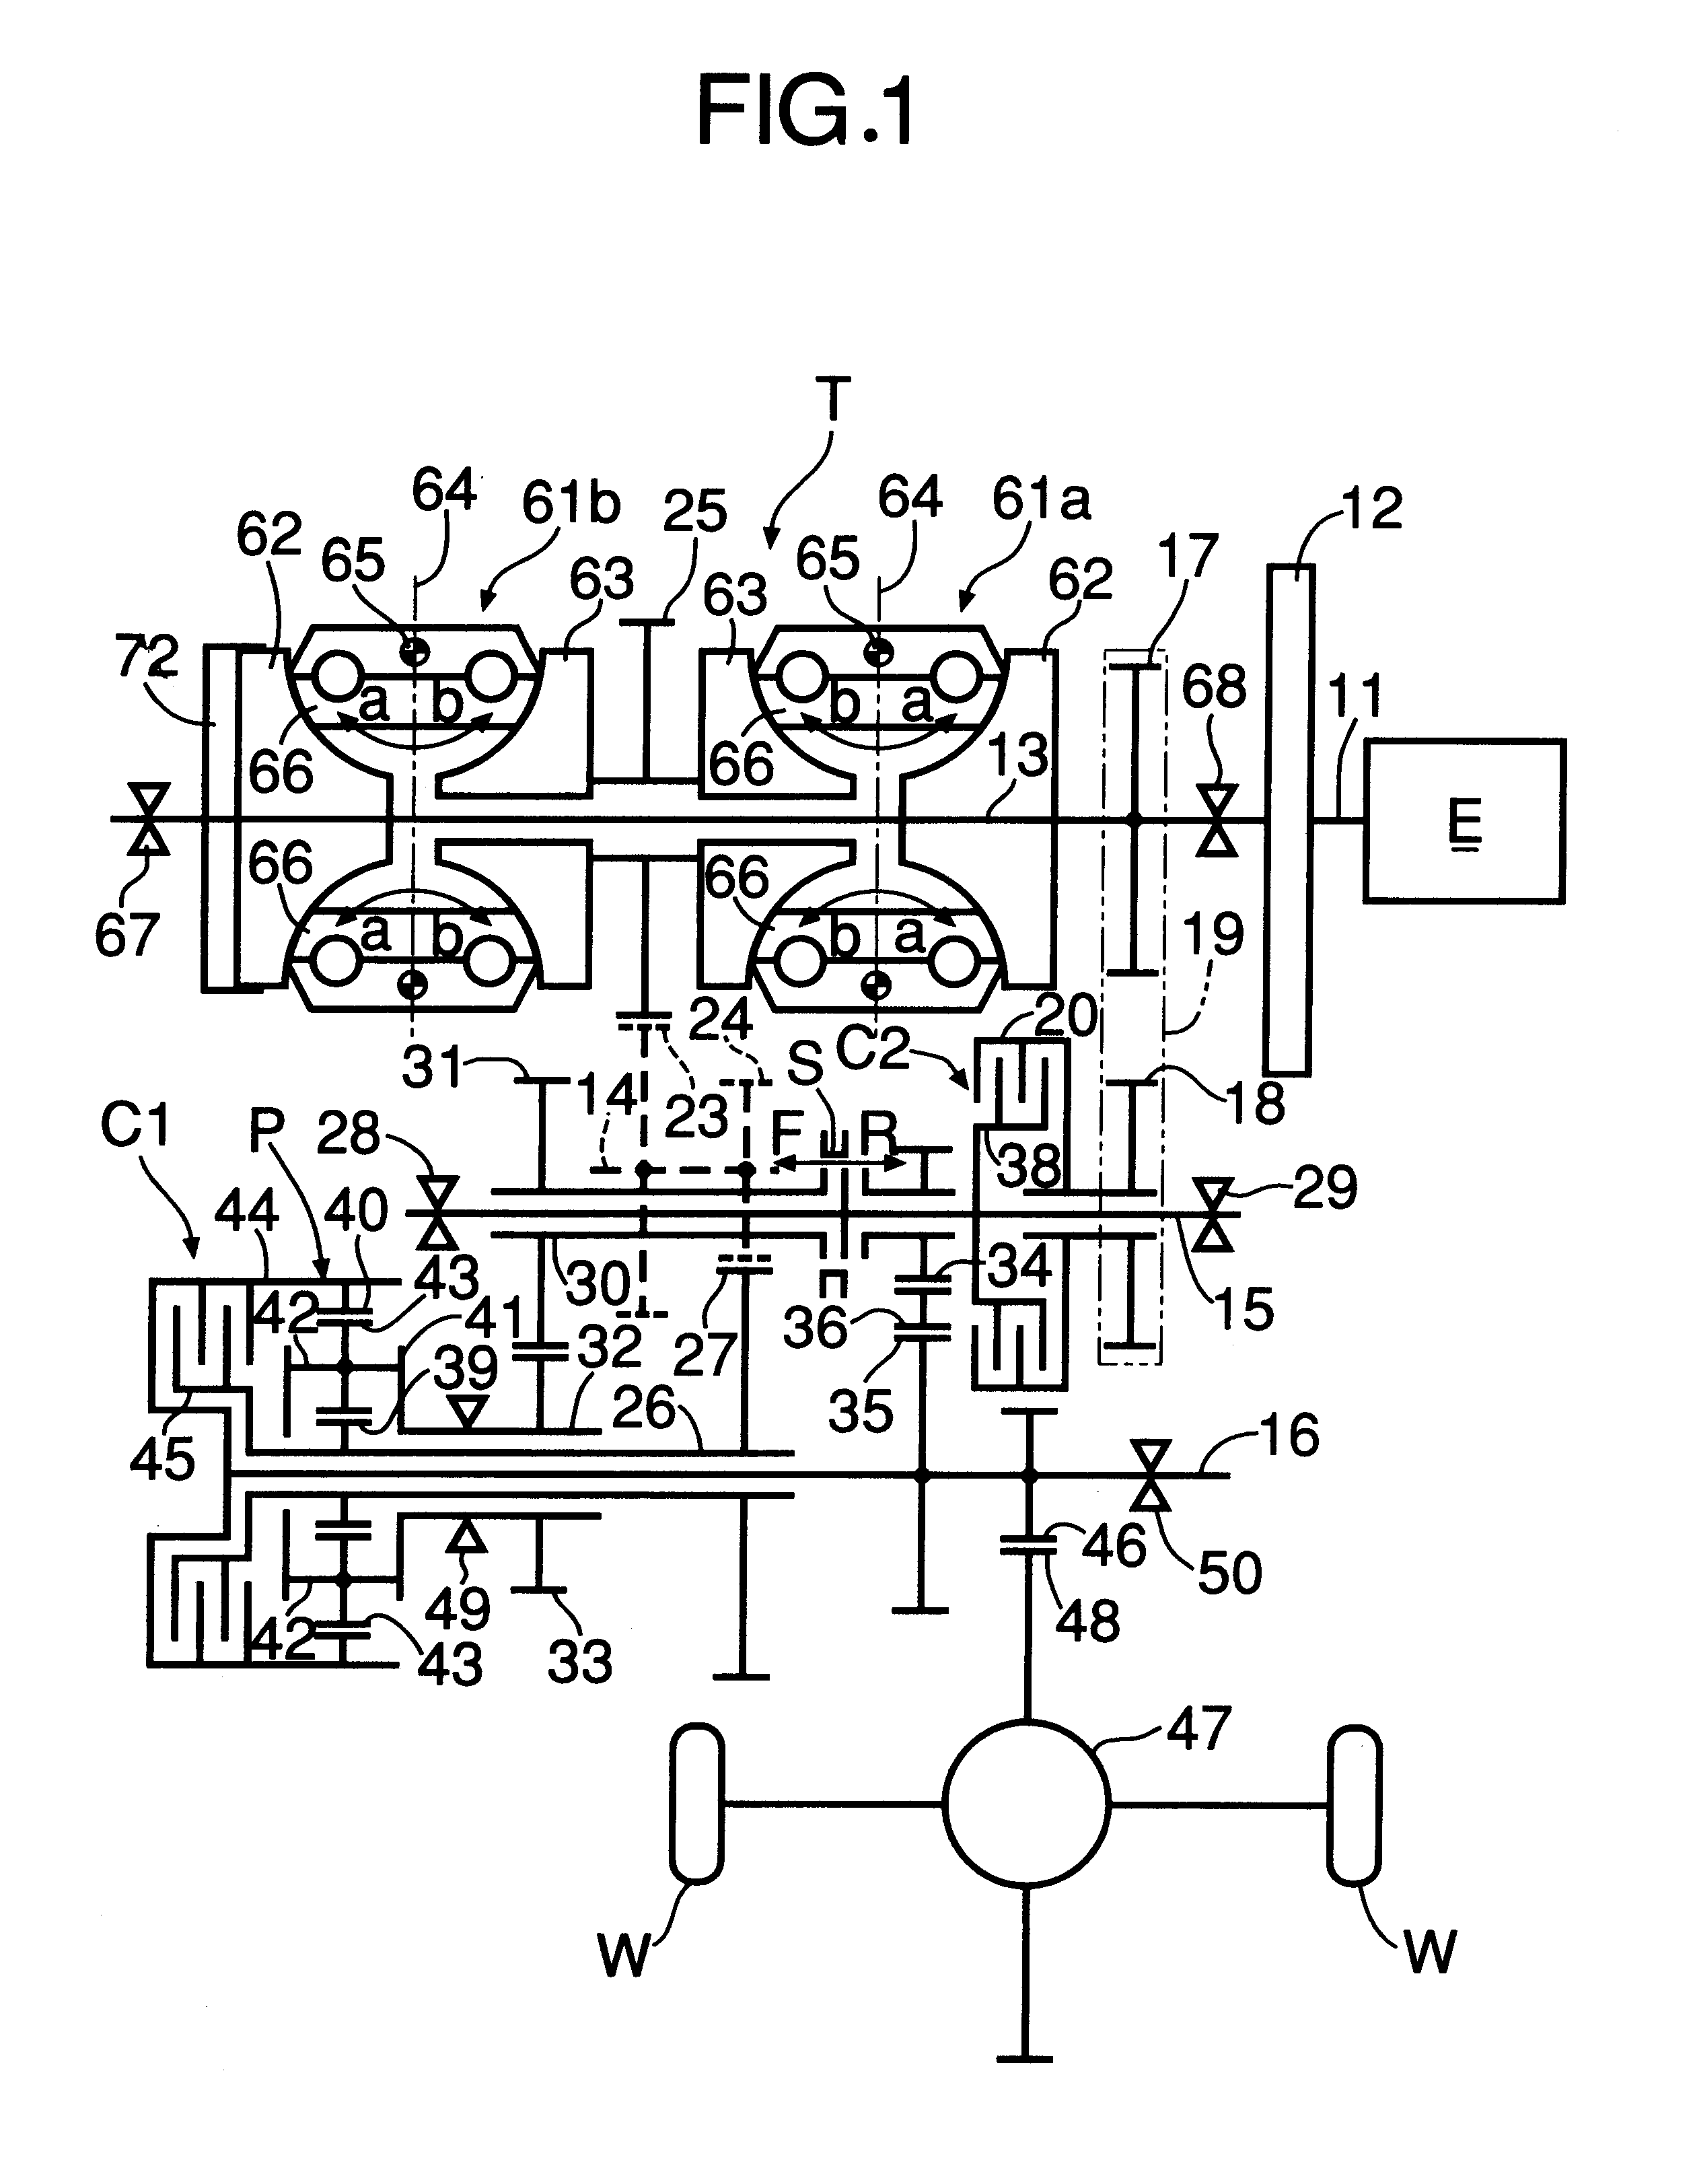 Clutch control system in continuously variable transmission system for vehicle